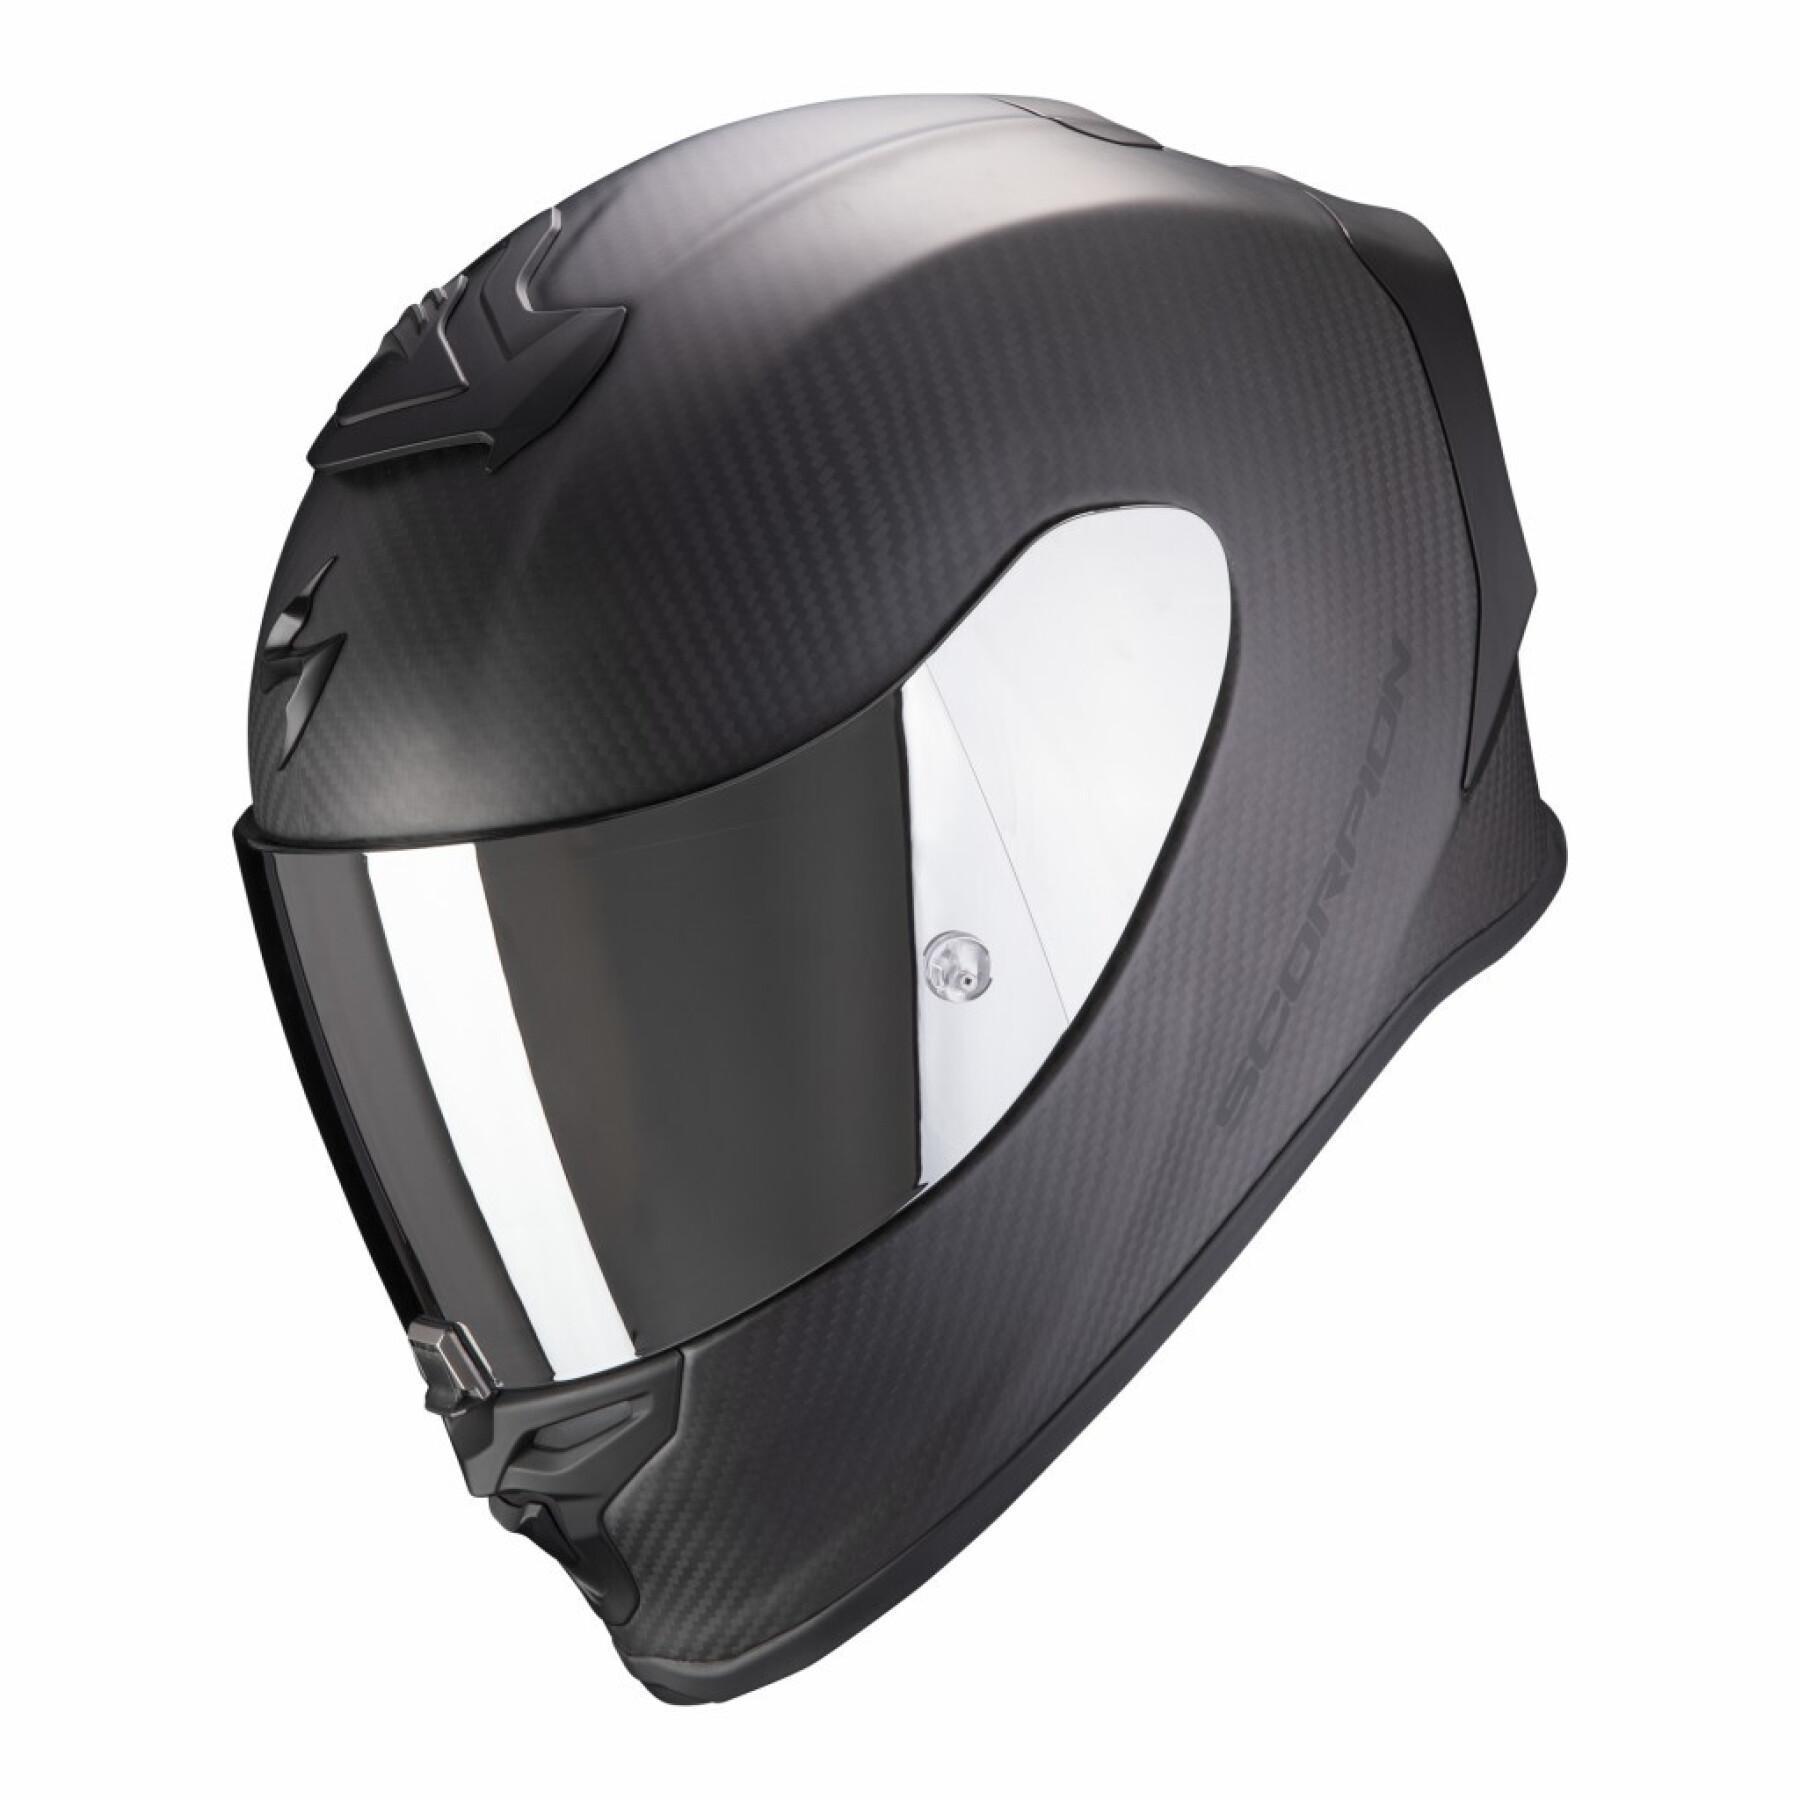 Full face motorcycle helmet Scorpion Exo-R1 Evo Carbon Air Solid ECE 22-06